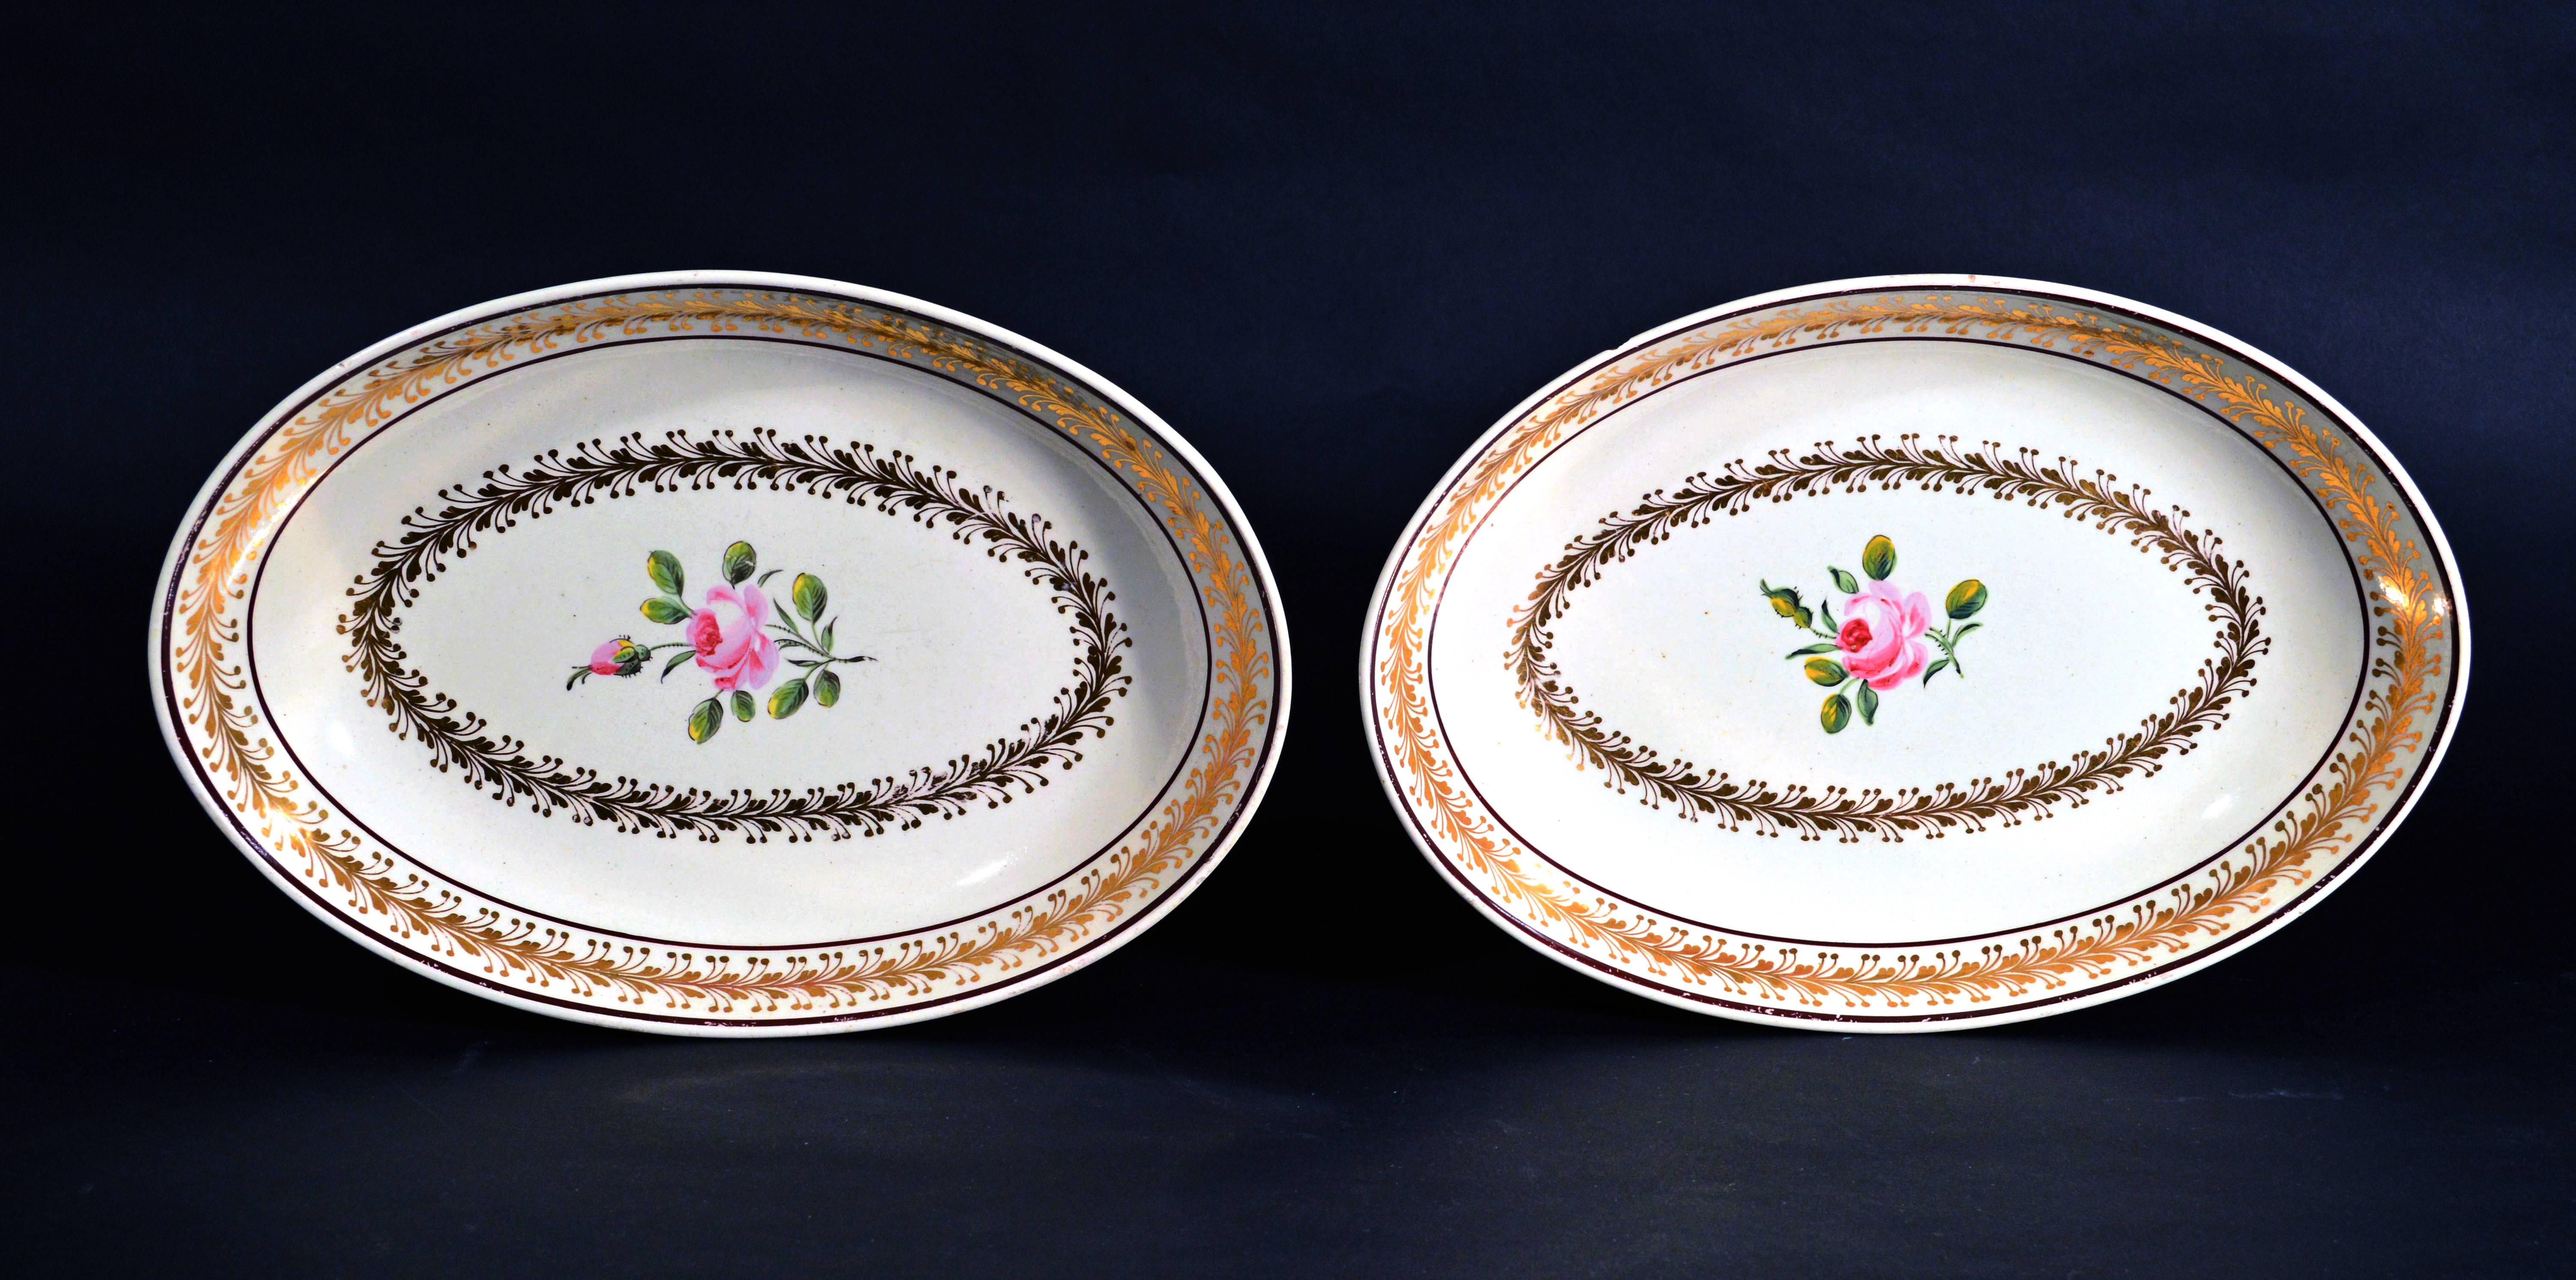 Creamware English pottery pair of botanical 18th-century dishes,
Neale Pottery.

The oval dishes are a rich creamy color painted in the interior with a rose stem with an open rose and a rosebud. 

Around the inner well is a band of finely